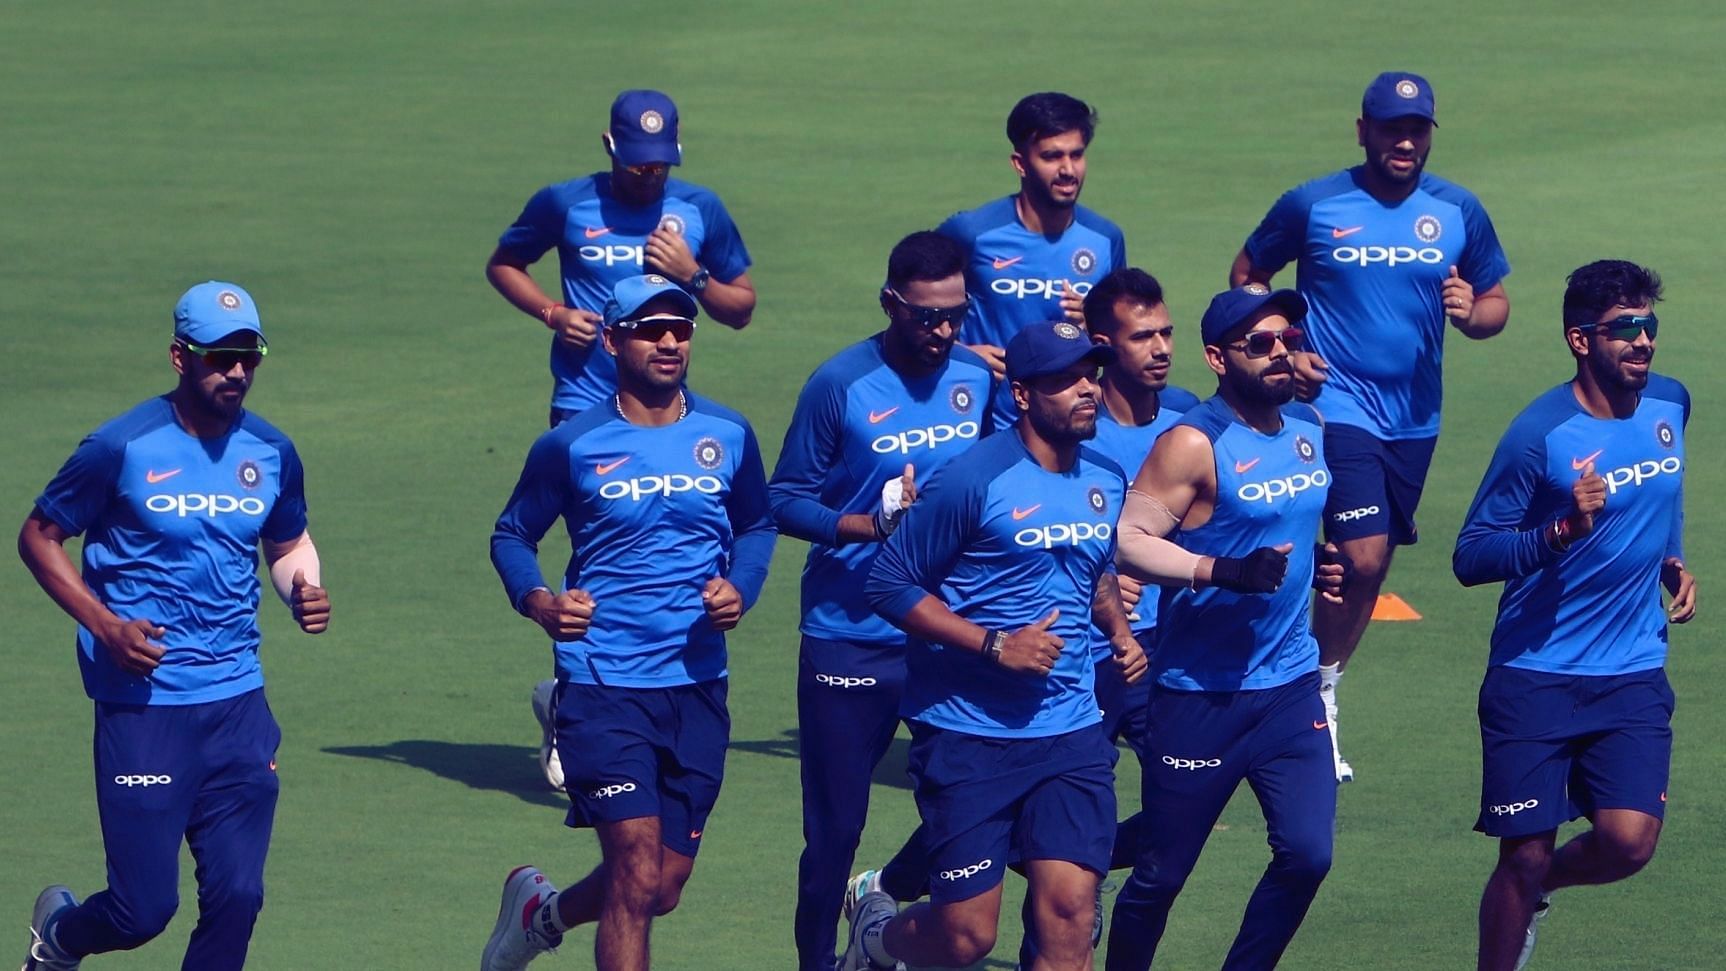 India play Australia in two T20 Internationals, starting 24 February.